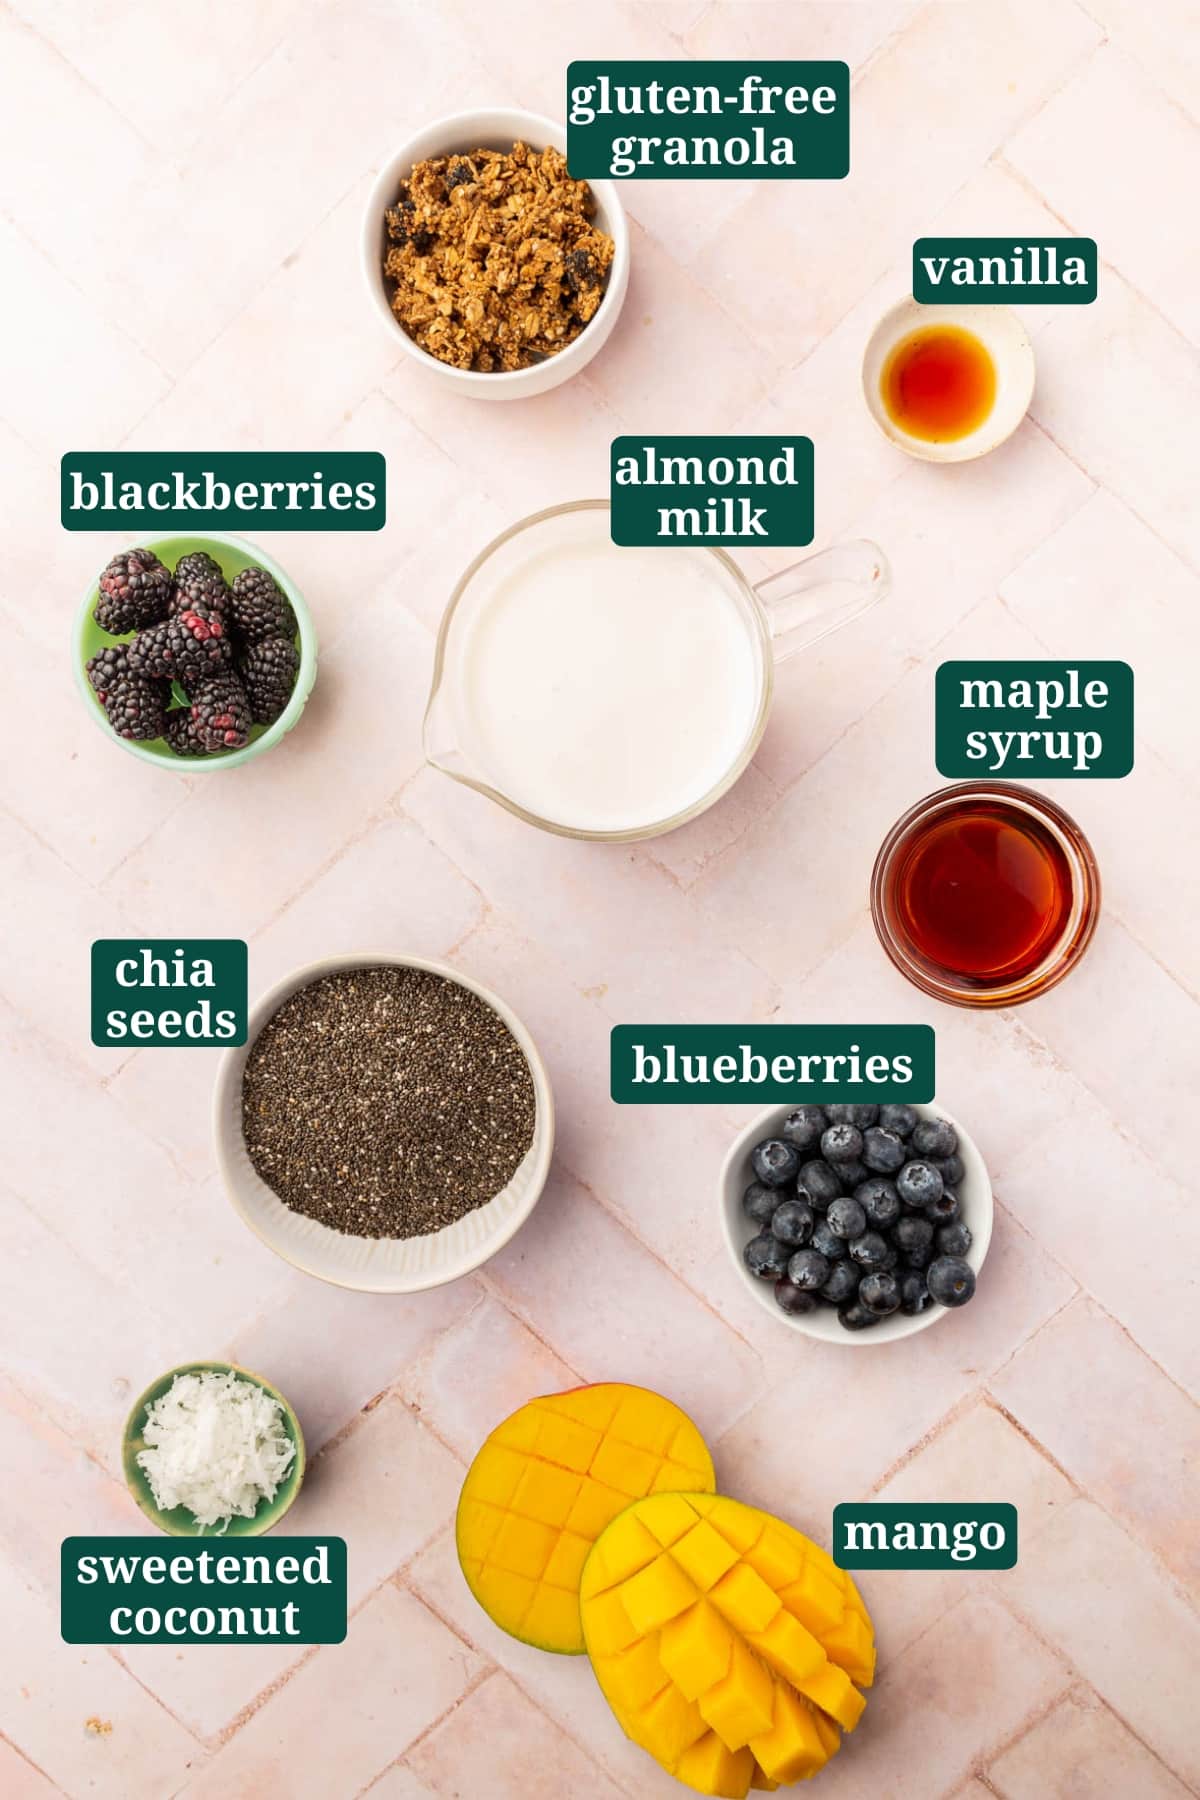 An overhead view of ingredients in small bowls to make a chia pudding breakfast bowl, including gluten-free granola, blackberries, almond milk, vanilla, maple syrup, chia seeds, blueberries, sweetened coconut shreds, and mango with text overlays over each ingredient.